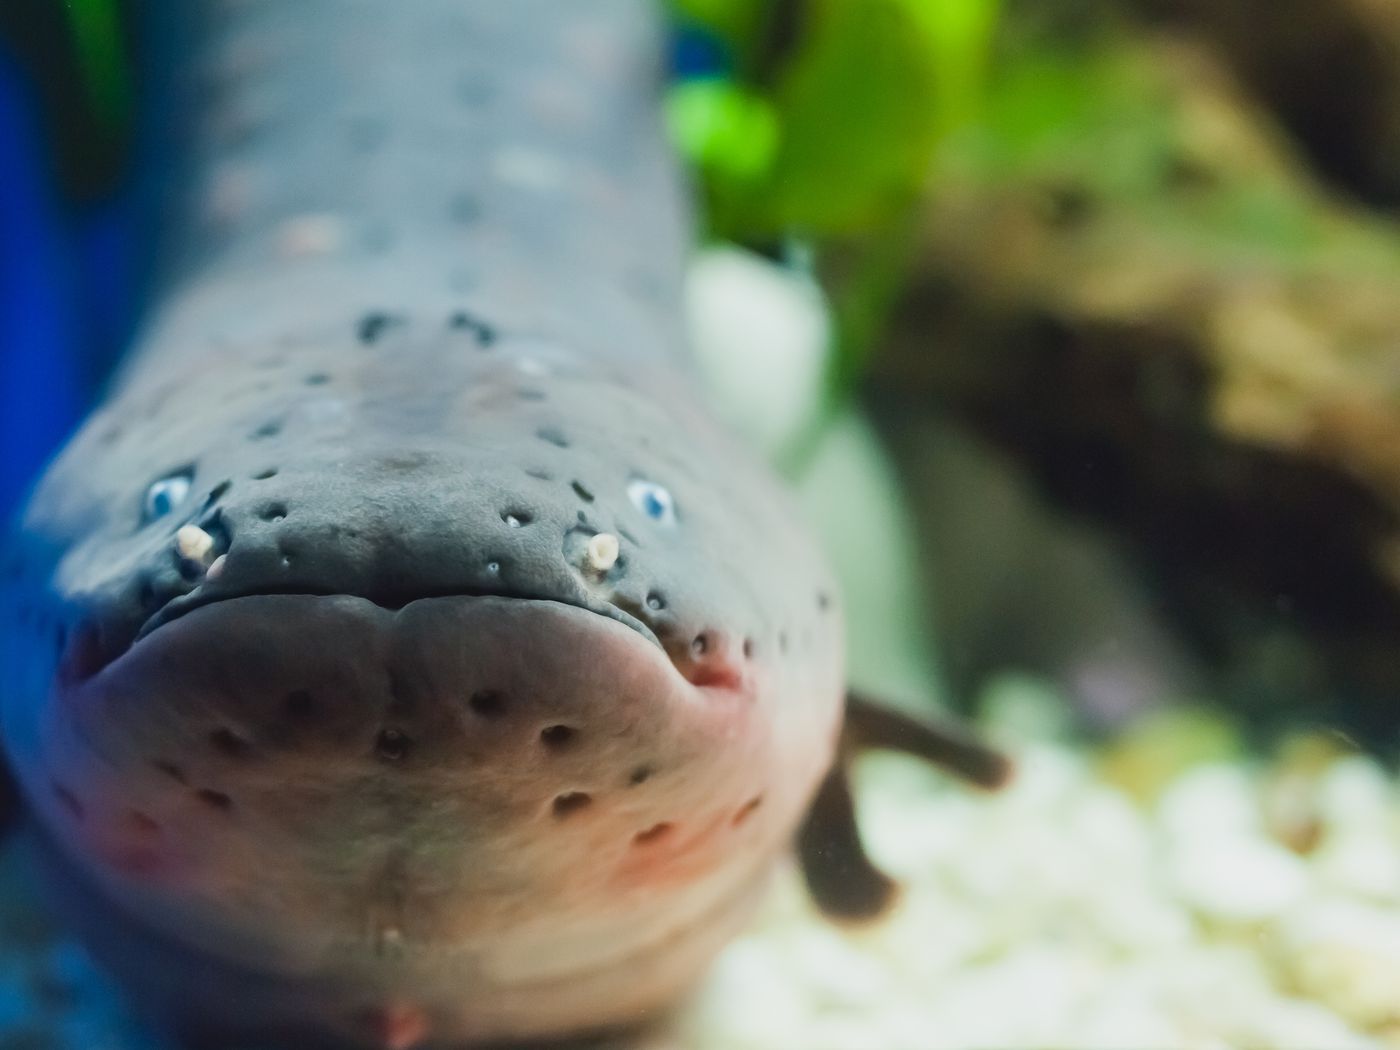 Watch an electric eel paralyze its prey before eating it